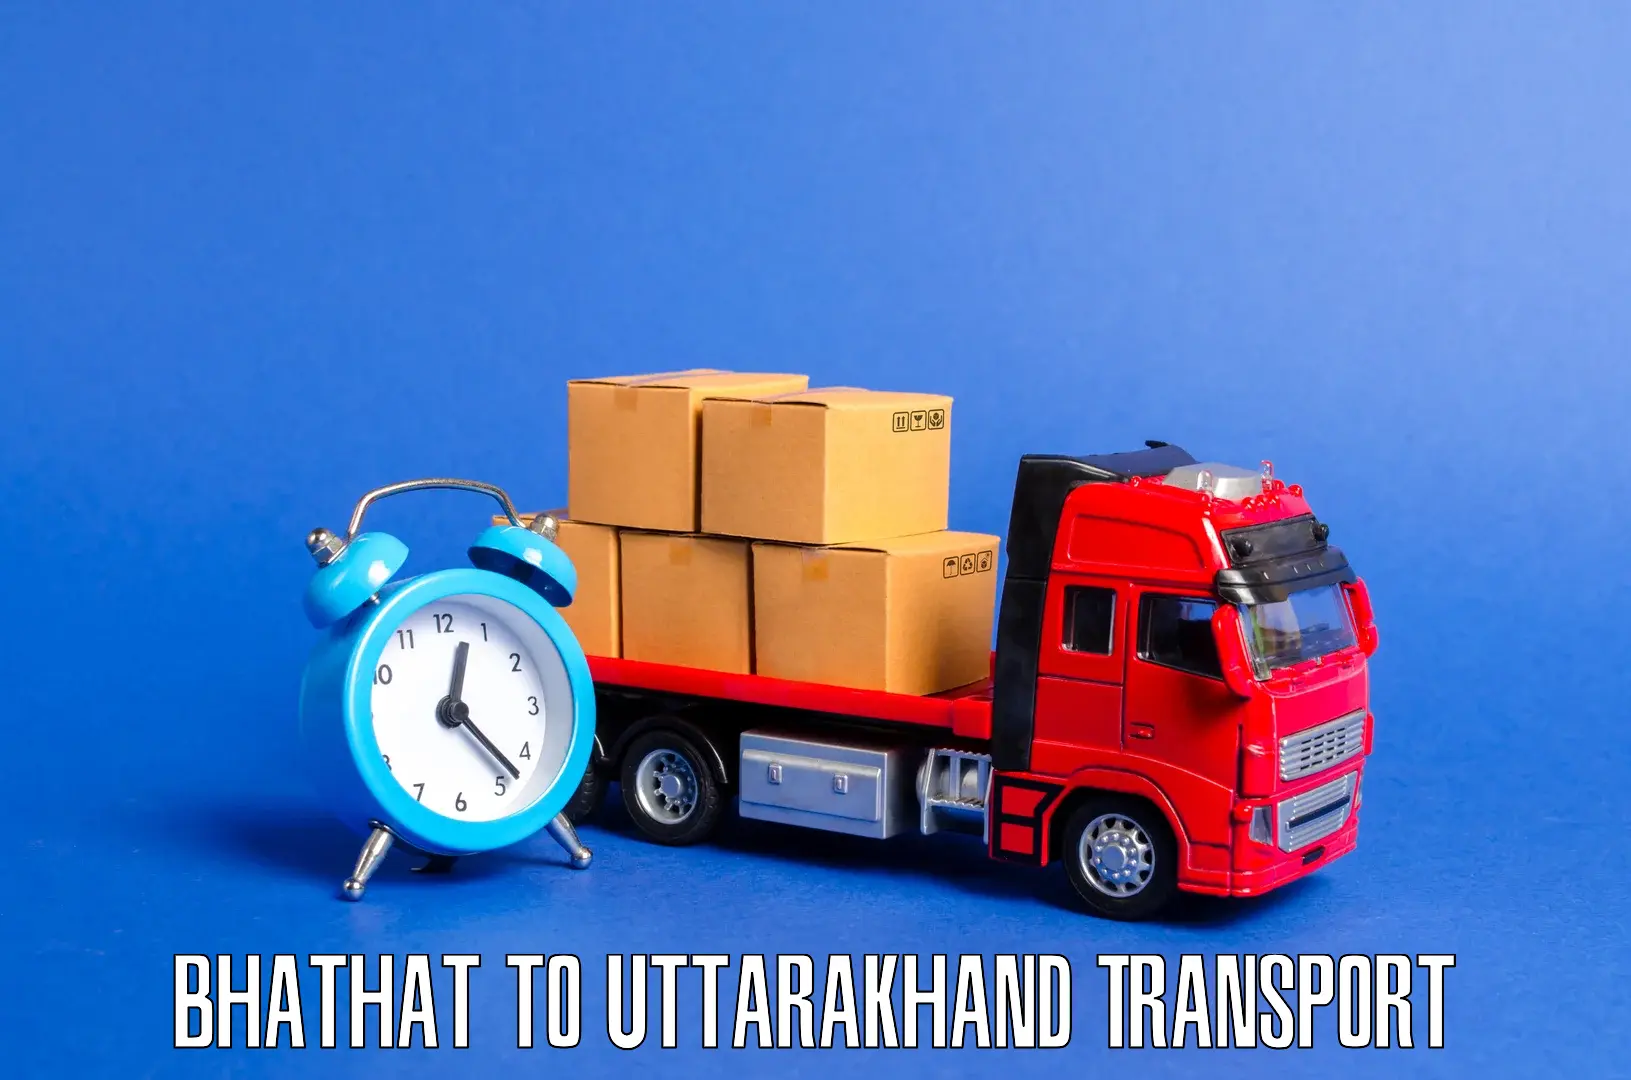 Container transport service Bhathat to Rudrapur